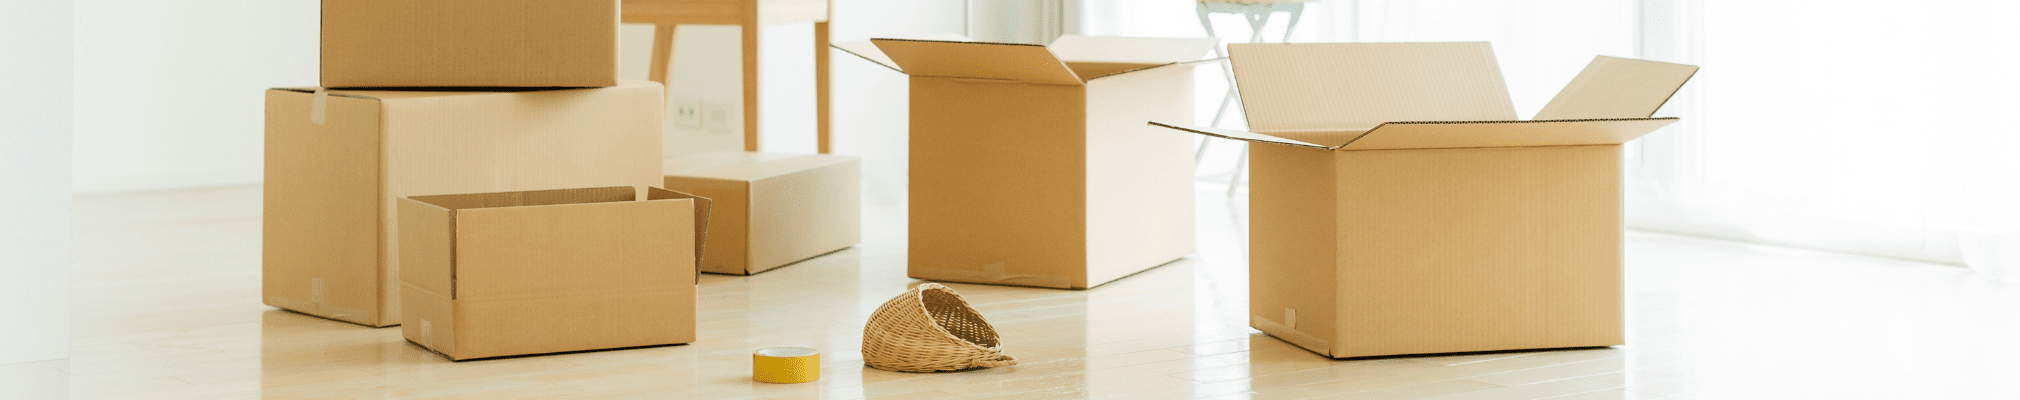 Moving boxes - find a Shared Ownership home on Share to Buy!